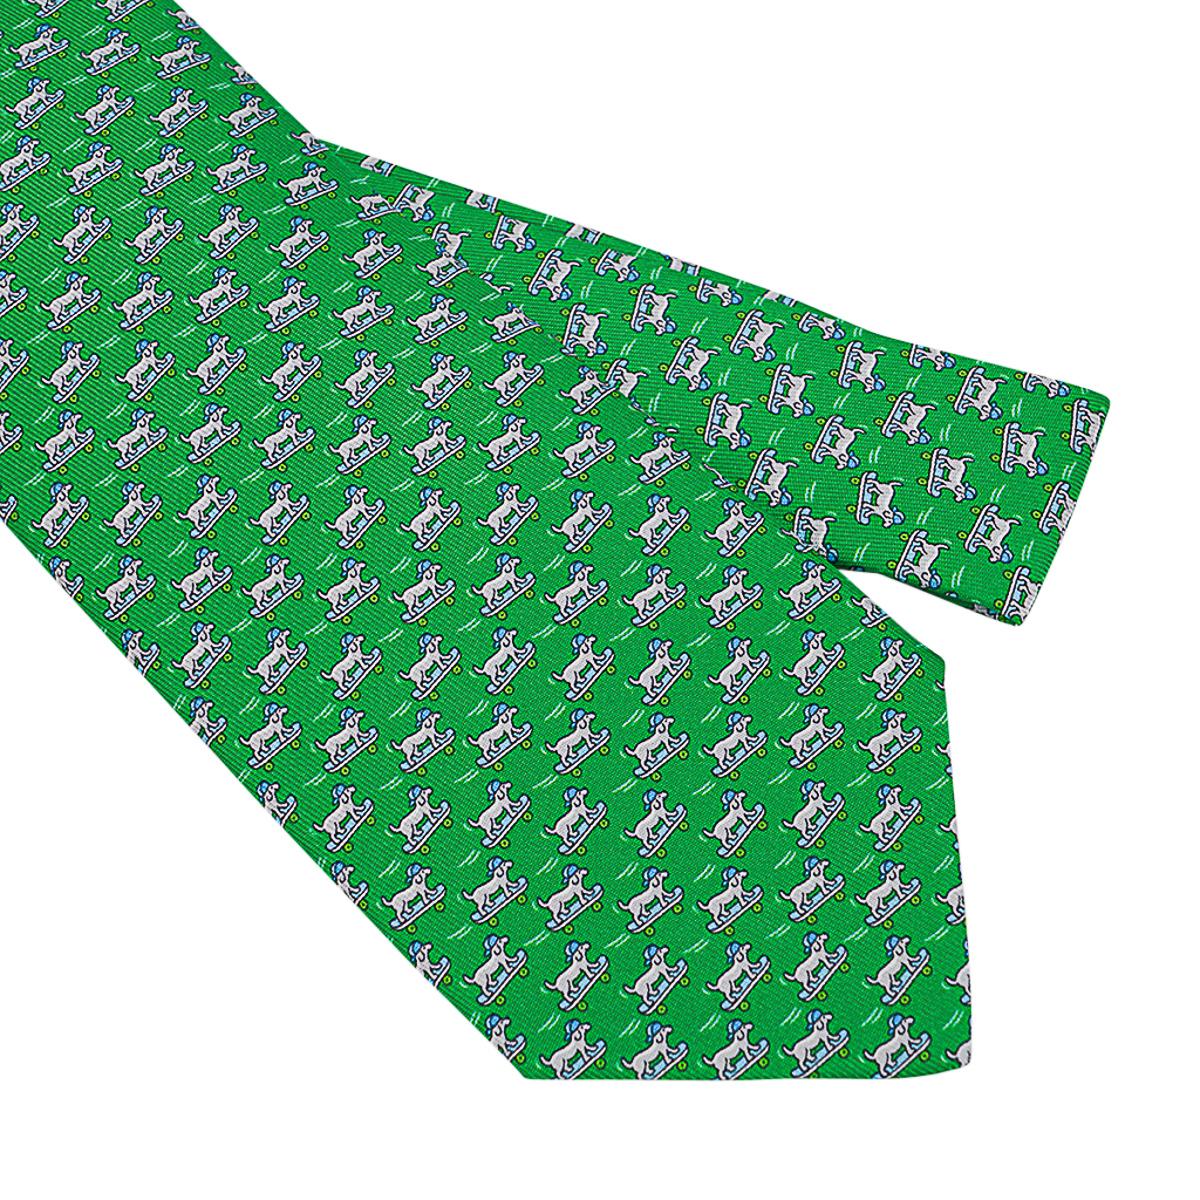 Mightychic offers an Hermes 7 Roller Dog Twillbi silk tie featured in Vert and Gris colorway.
Skateboarding dog with a helmet in the front.
The tail has a sitting dog and skateboards along the length.
Designed by Philippe Mouquet.
This delightful